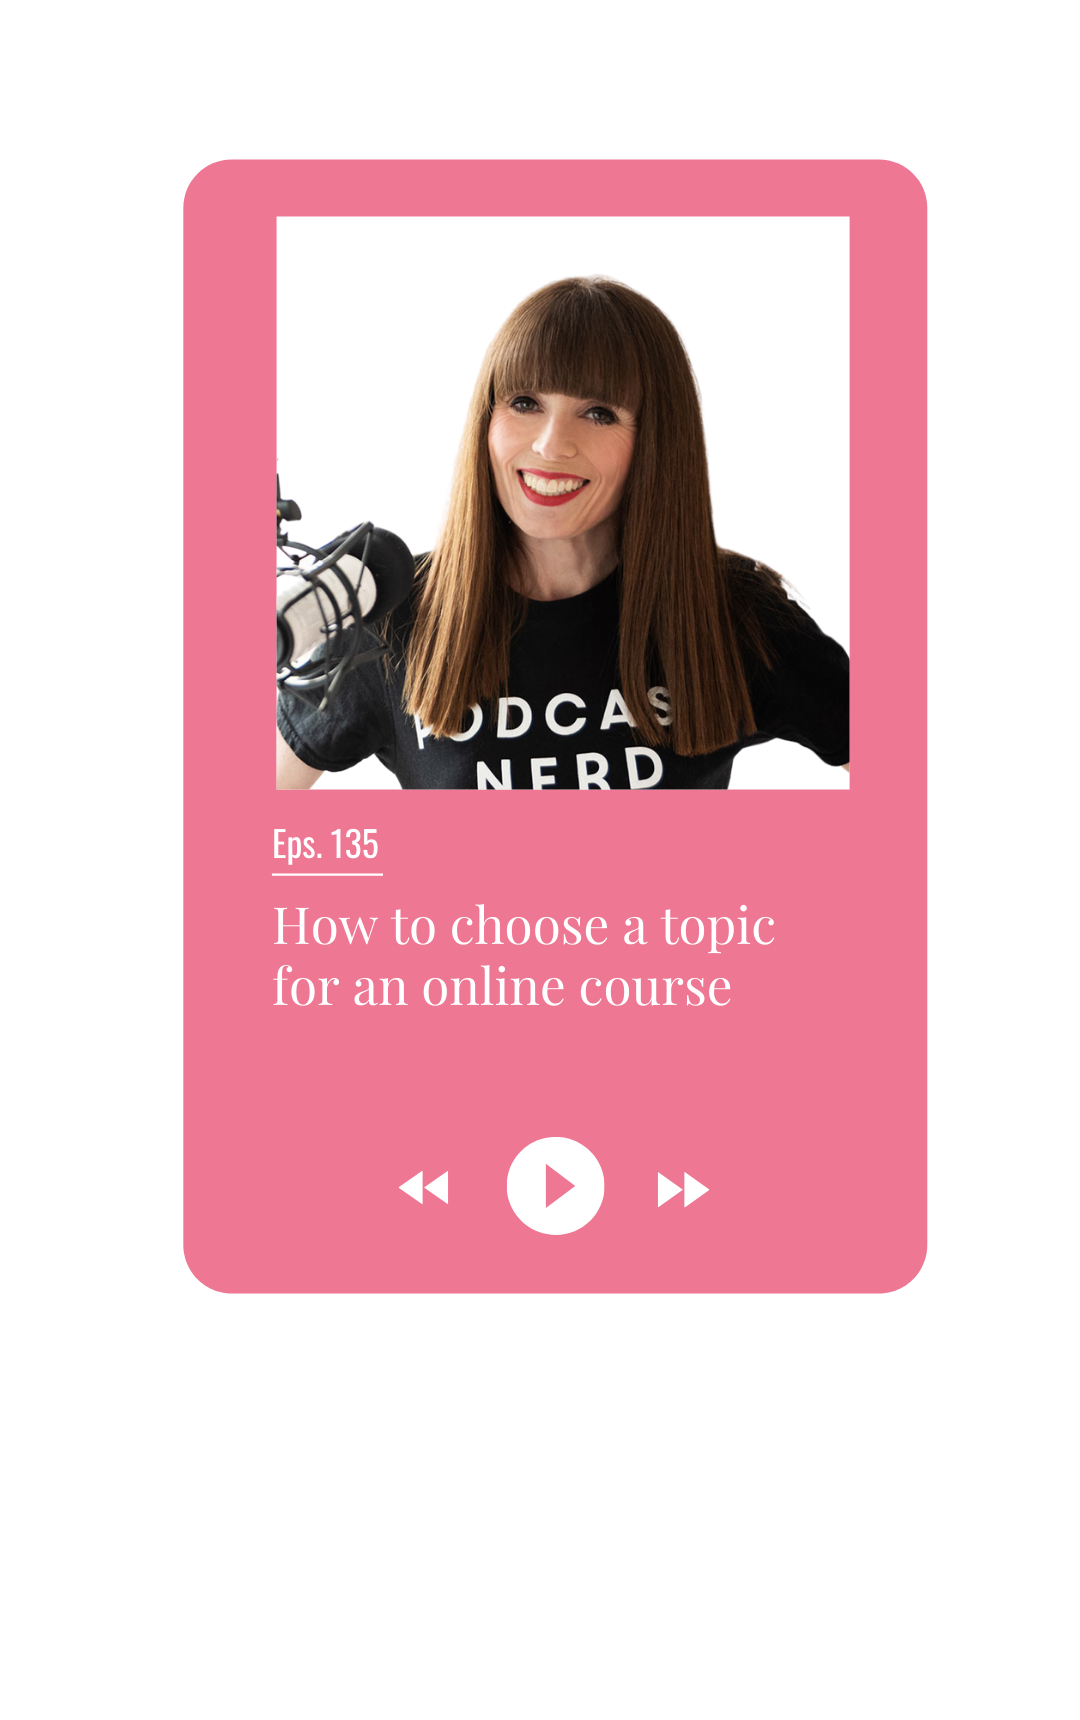 How to choose a topic for an online course